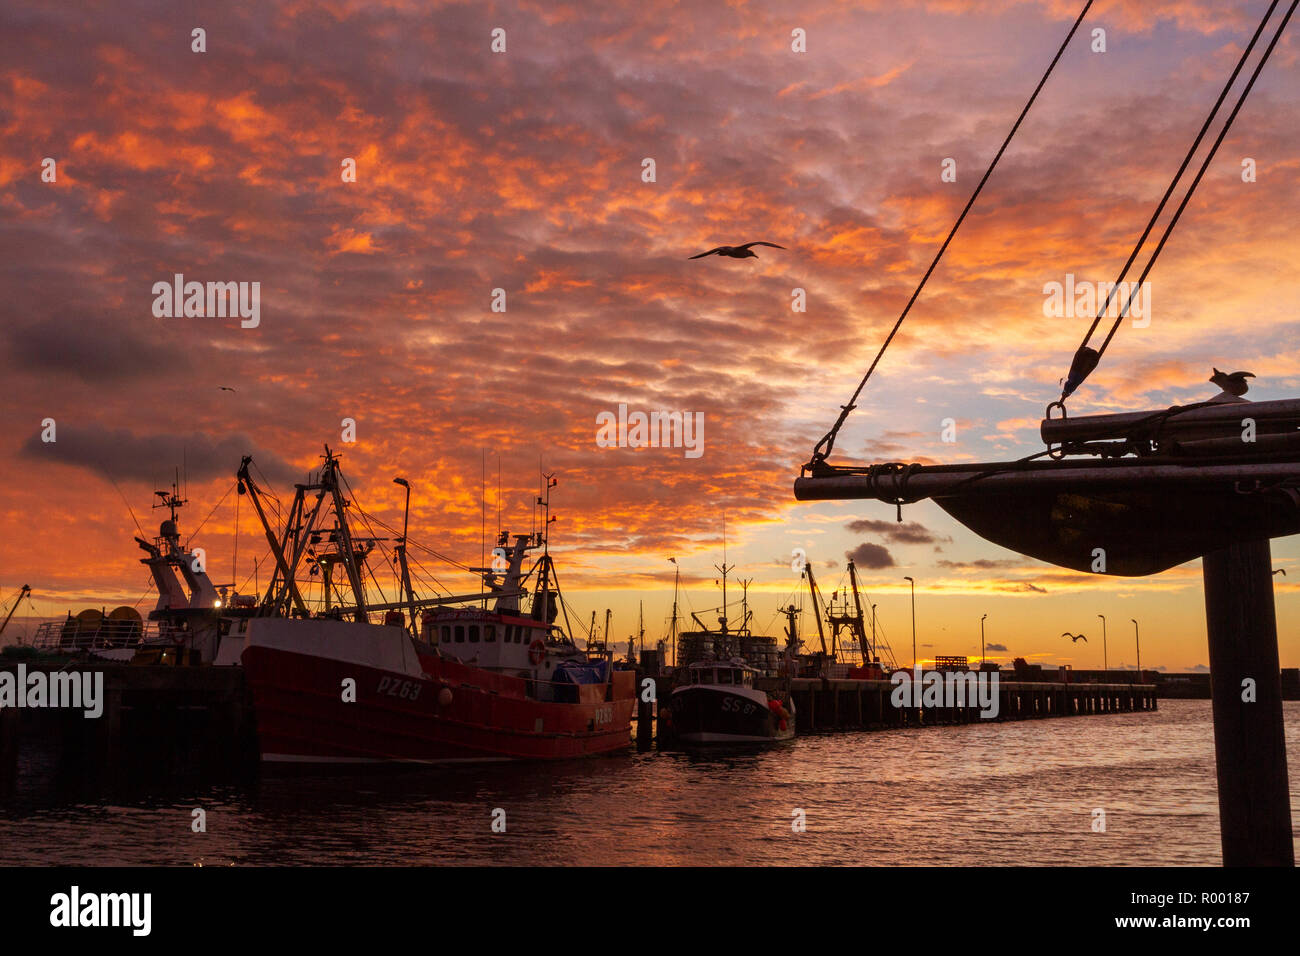 Newlyn, Cornwall, UK, 31st October 2018. Stunning red skies over the fishing port of Newlyn this morning. Credit: Mike Newman/Alamy Live News. Stock Photo